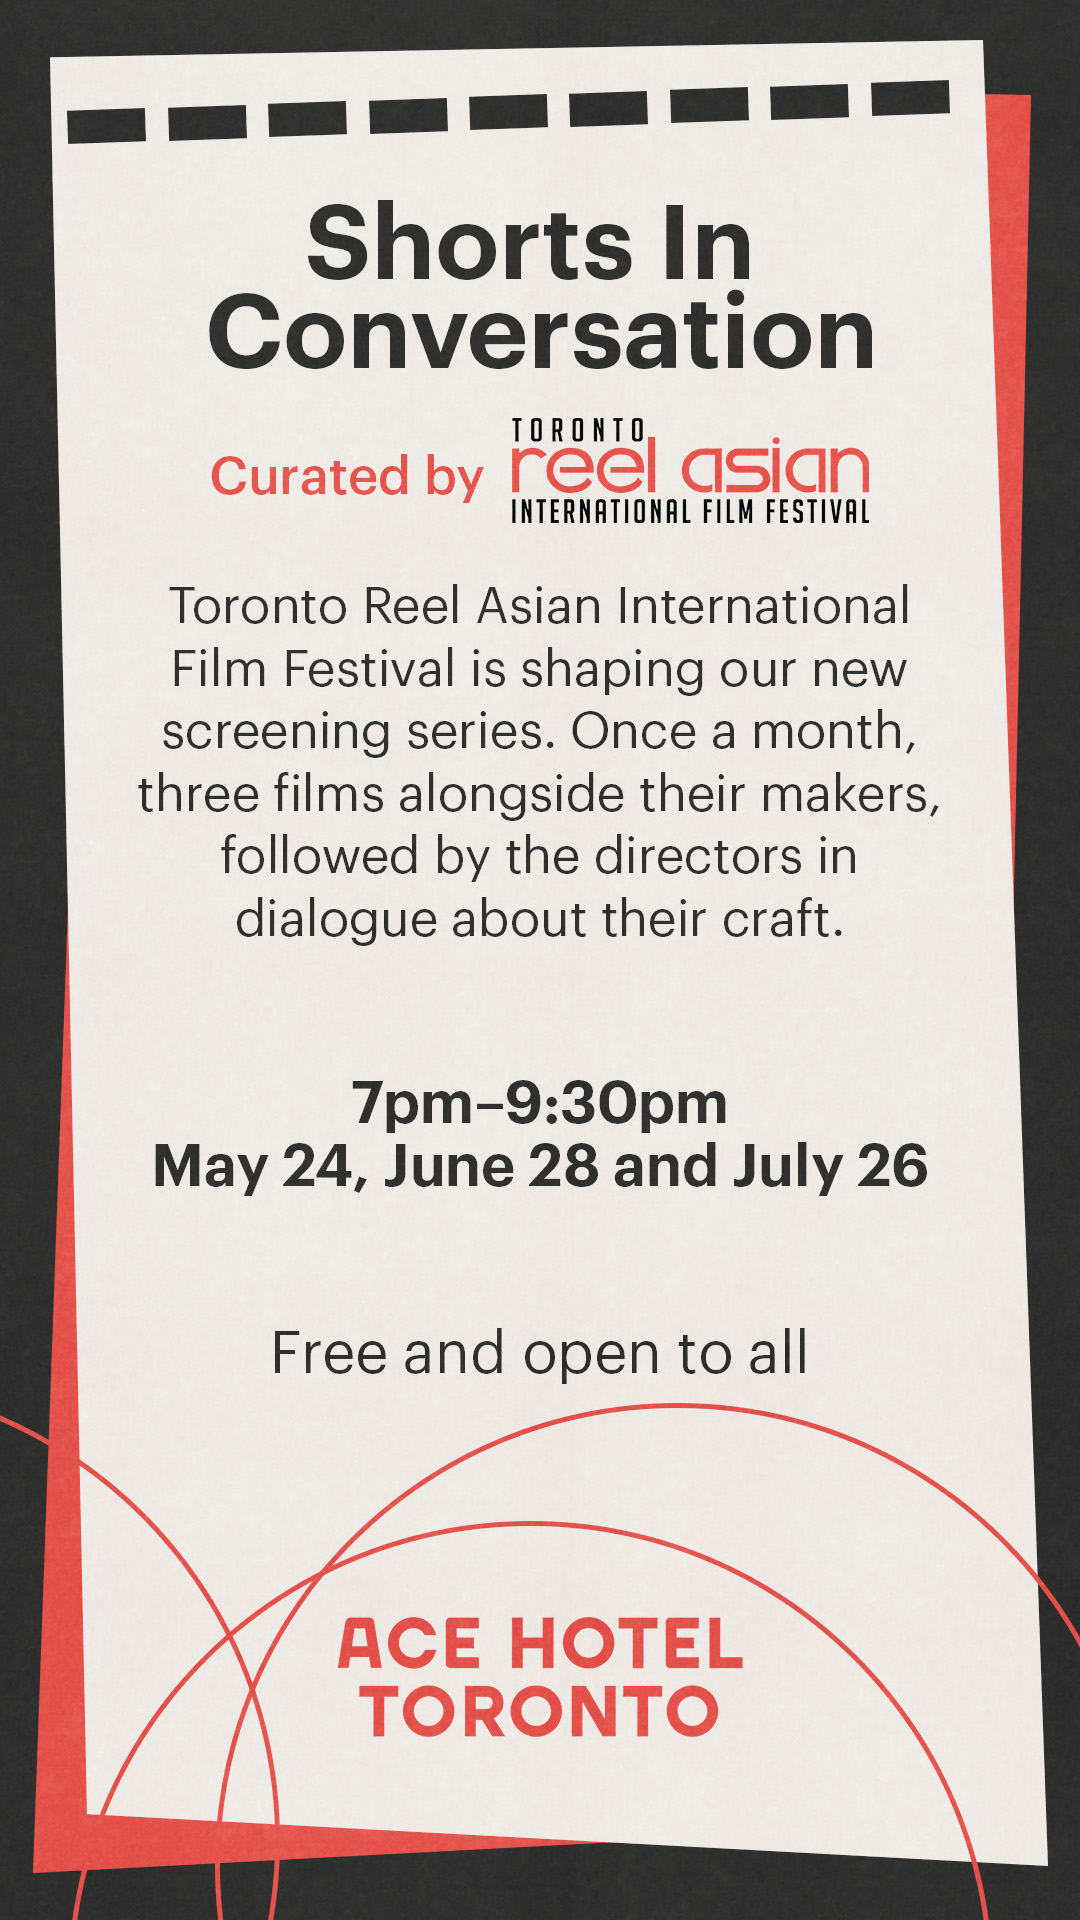 A graphic that reads "Shorts in Conversation curated by Reel Asian". Includes a brief description and the dates: May 24, June 28, and July 27.